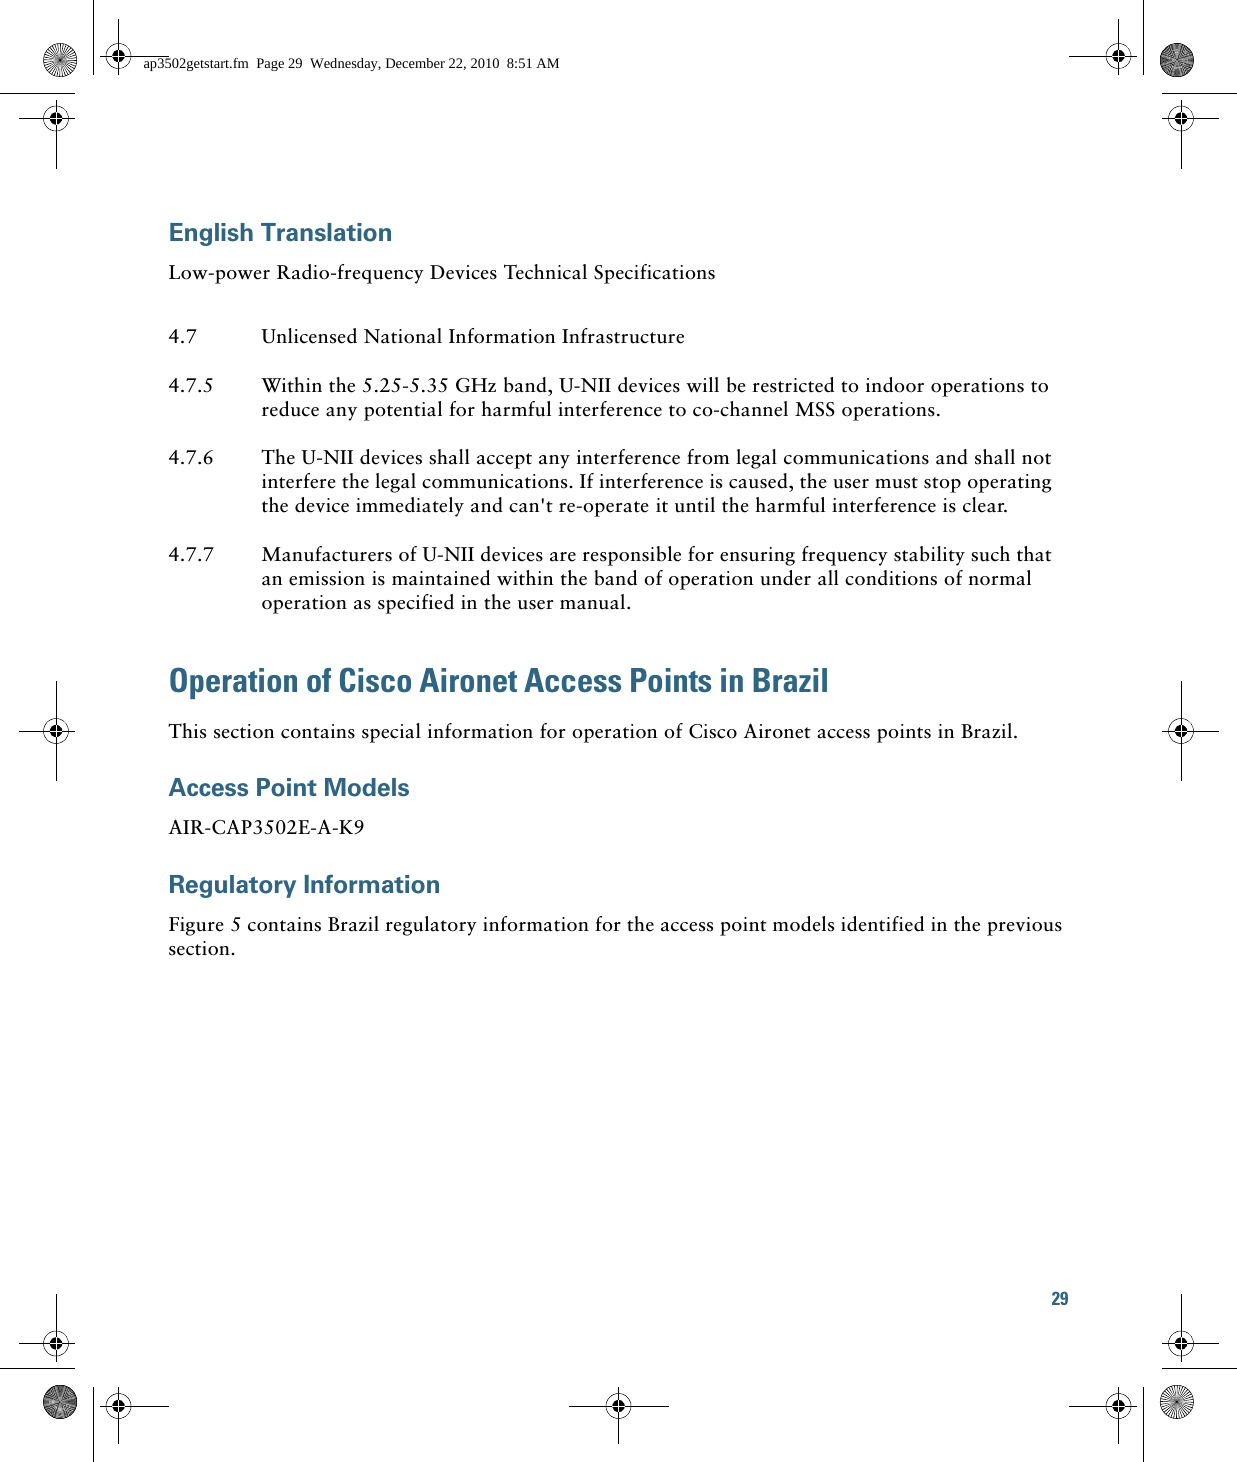 29 English TranslationLow-power Radio-frequency Devices Technical SpecificationsOperation of Cisco Aironet Access Points in BrazilThis section contains special information for operation of Cisco Aironet access points in Brazil.Access Point ModelsAIR-CAP3502E-A-K9Regulatory InformationFigure 5 contains Brazil regulatory information for the access point models identified in the previous section.4.7 Unlicensed National Information Infrastructure4.7.5 Within the 5.25-5.35 GHz band, U-NII devices will be restricted to indoor operations to reduce any potential for harmful interference to co-channel MSS operations.4.7.6 The U-NII devices shall accept any interference from legal communications and shall not interfere the legal communications. If interference is caused, the user must stop operating the device immediately and can&apos;t re-operate it until the harmful interference is clear.4.7.7 Manufacturers of U-NII devices are responsible for ensuring frequency stability such that an emission is maintained within the band of operation under all conditions of normal operation as specified in the user manual.ap3502getstart.fm  Page 29  Wednesday, December 22, 2010  8:51 AM